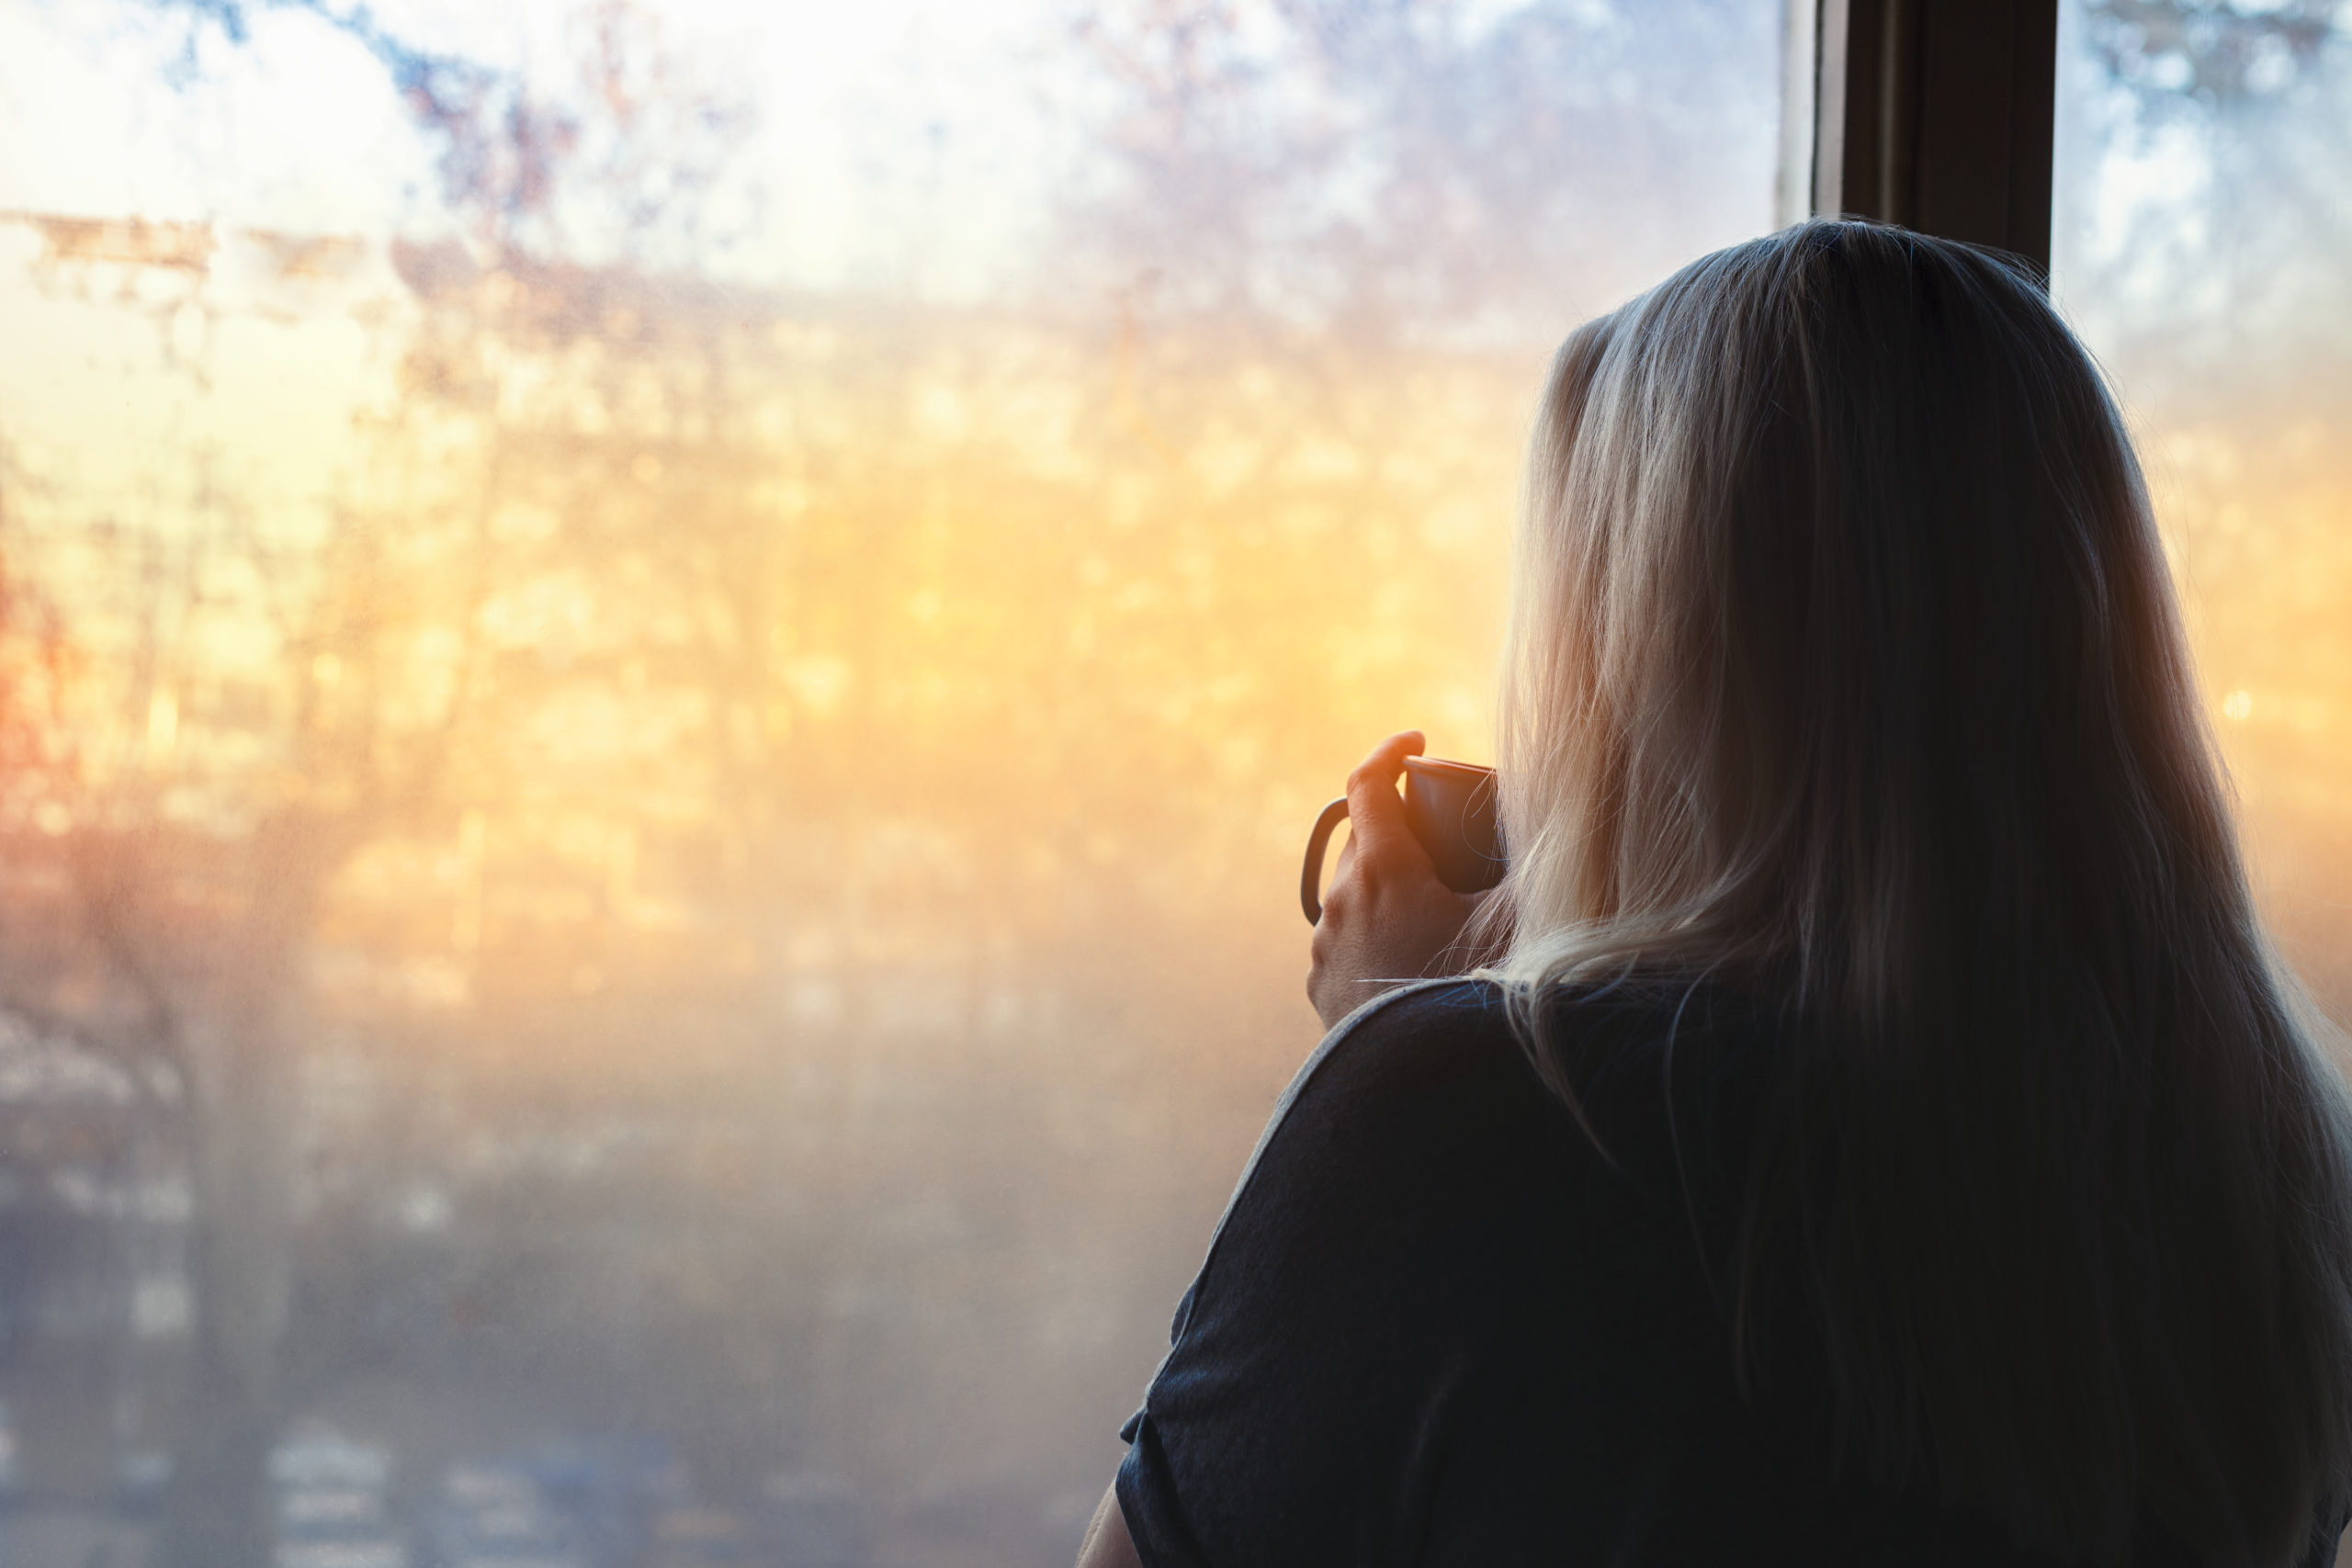 Blonde woman standing by the window, with coffee cup in hands, looking out into the morning light